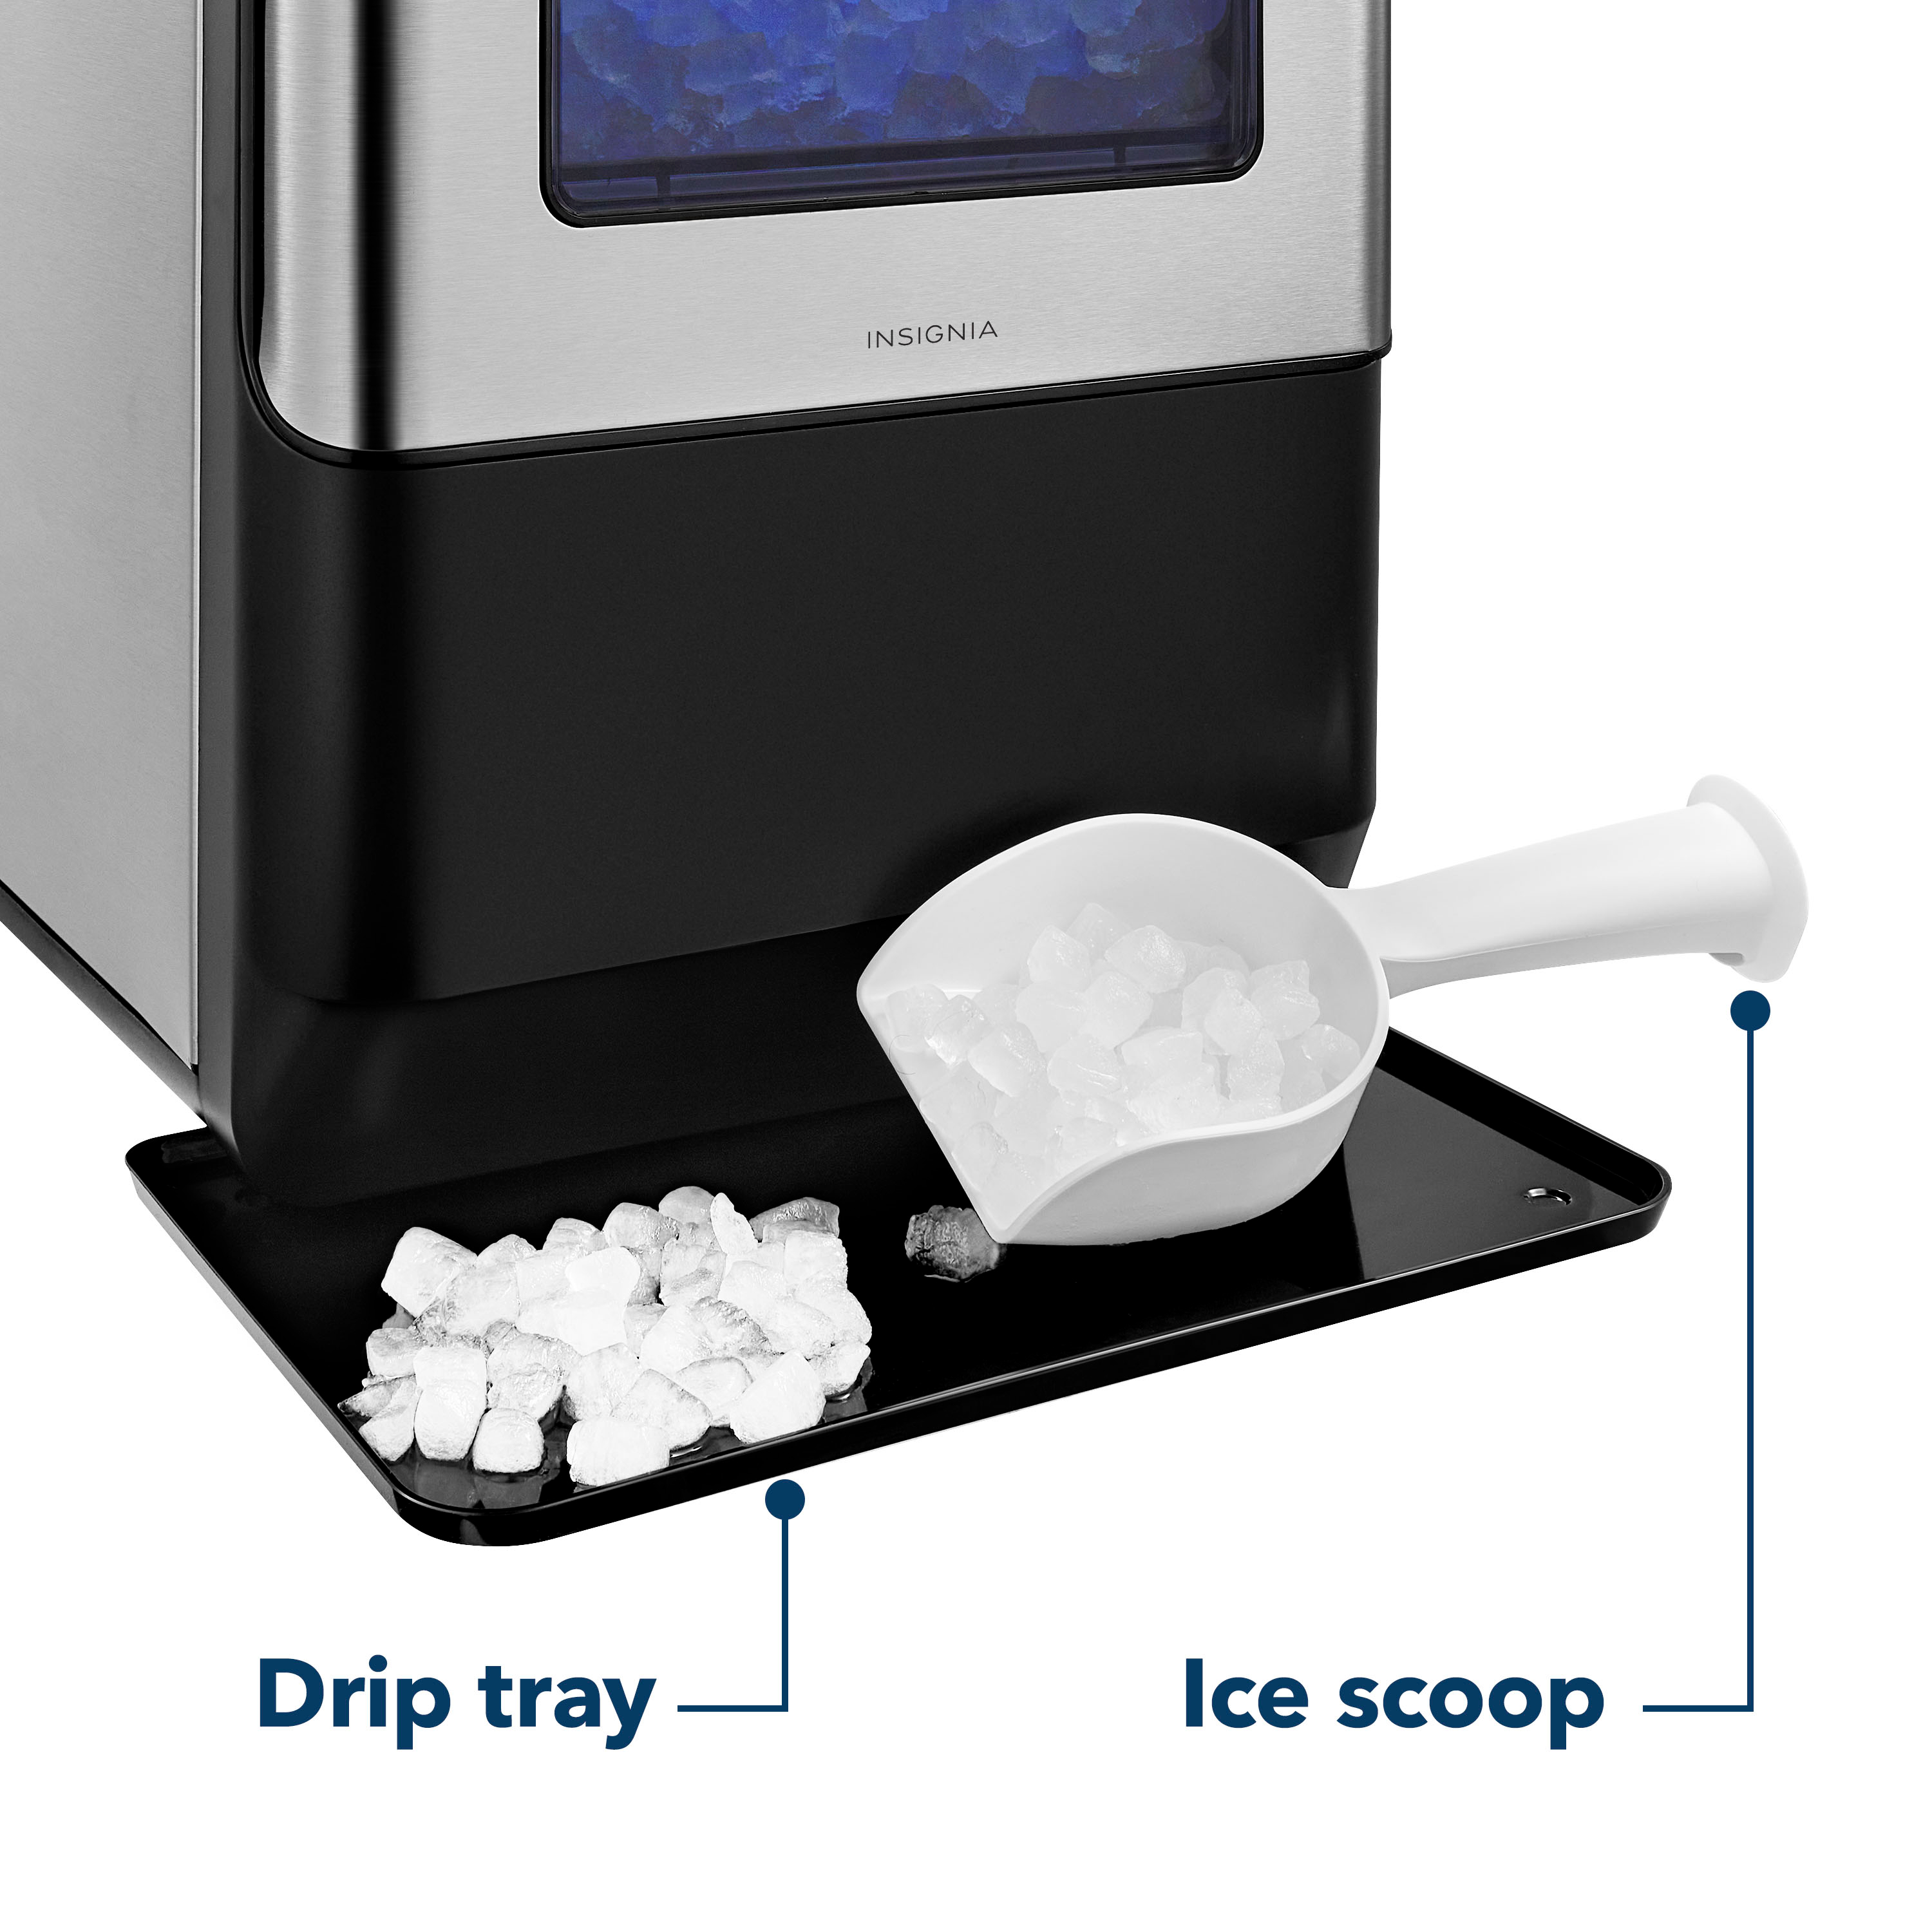 Scoop Up this Countertop Nugget Ice Maker at a Discount Right Now